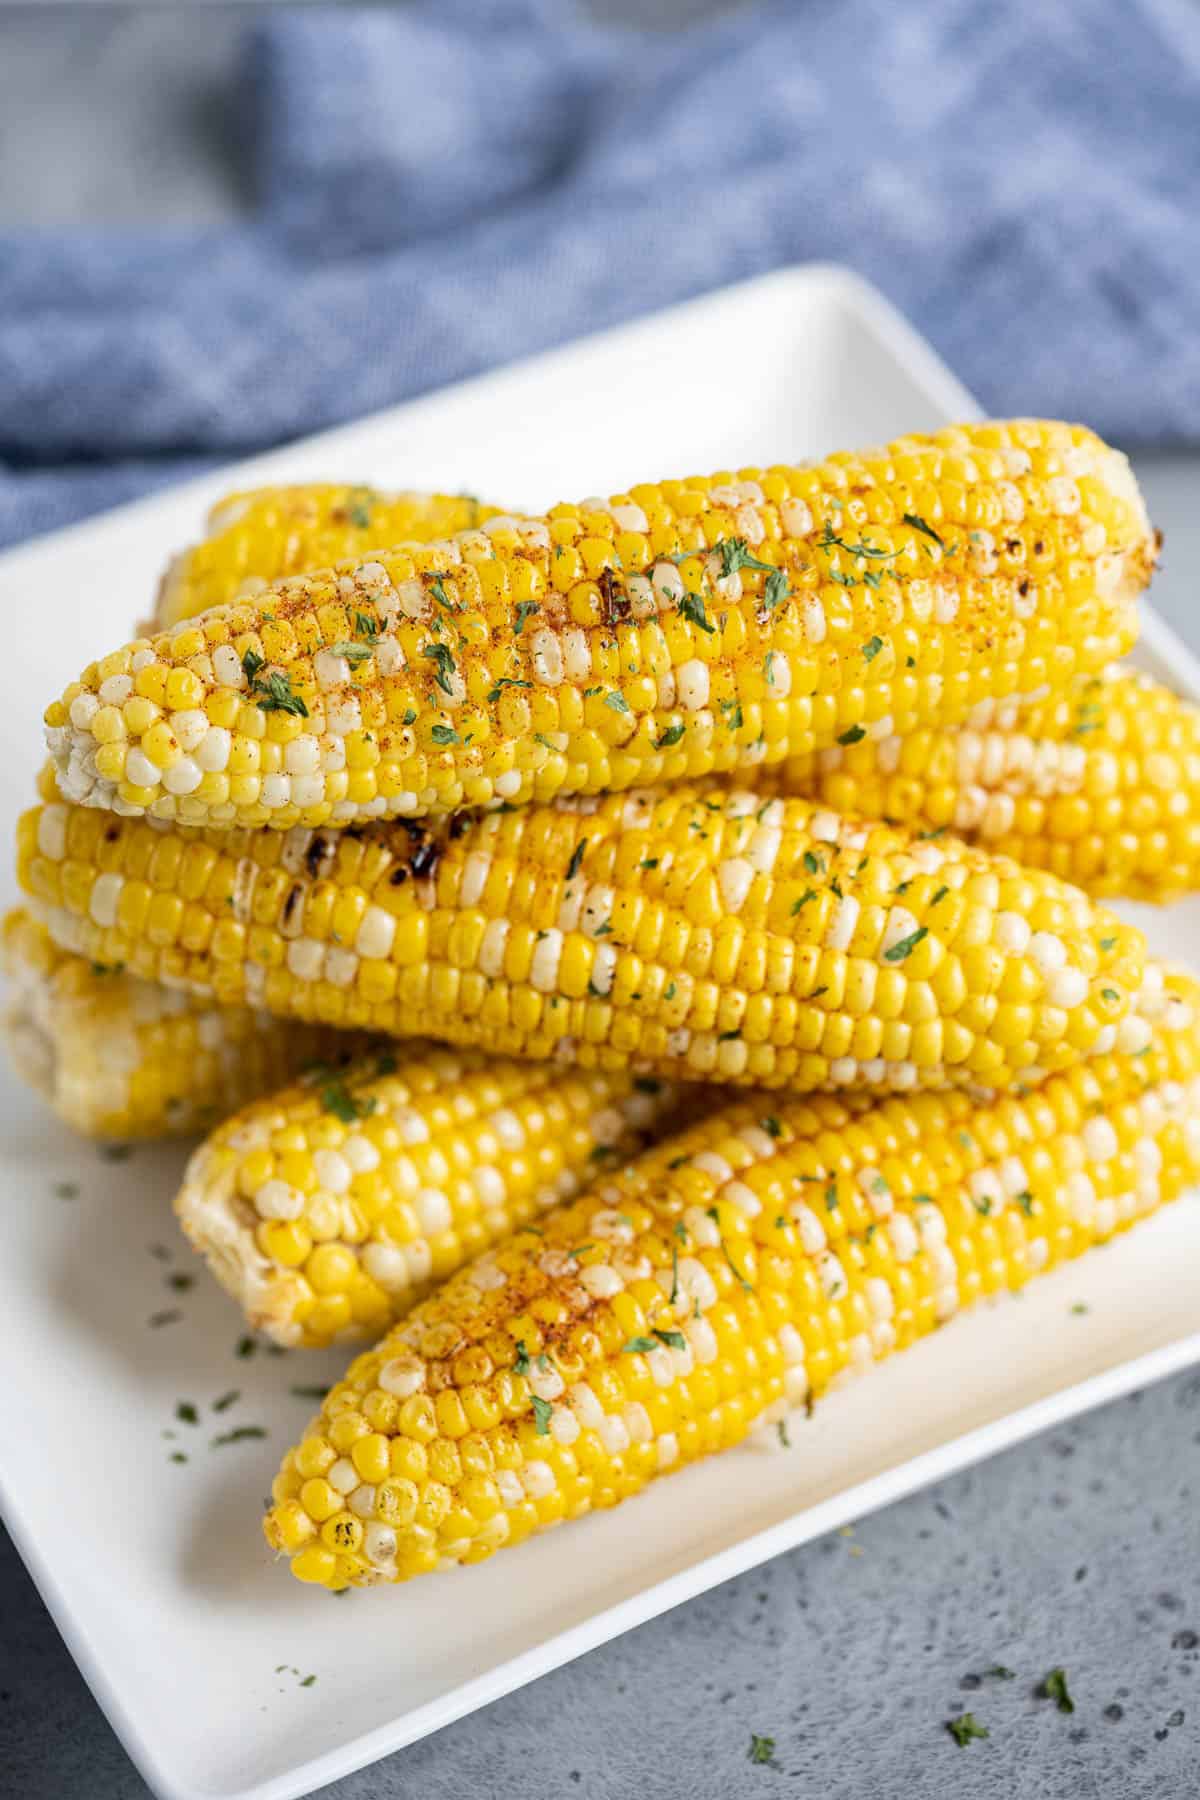 Seasoned and grilled ears of corn on the cob on a plate in front of a blue linen napkin.